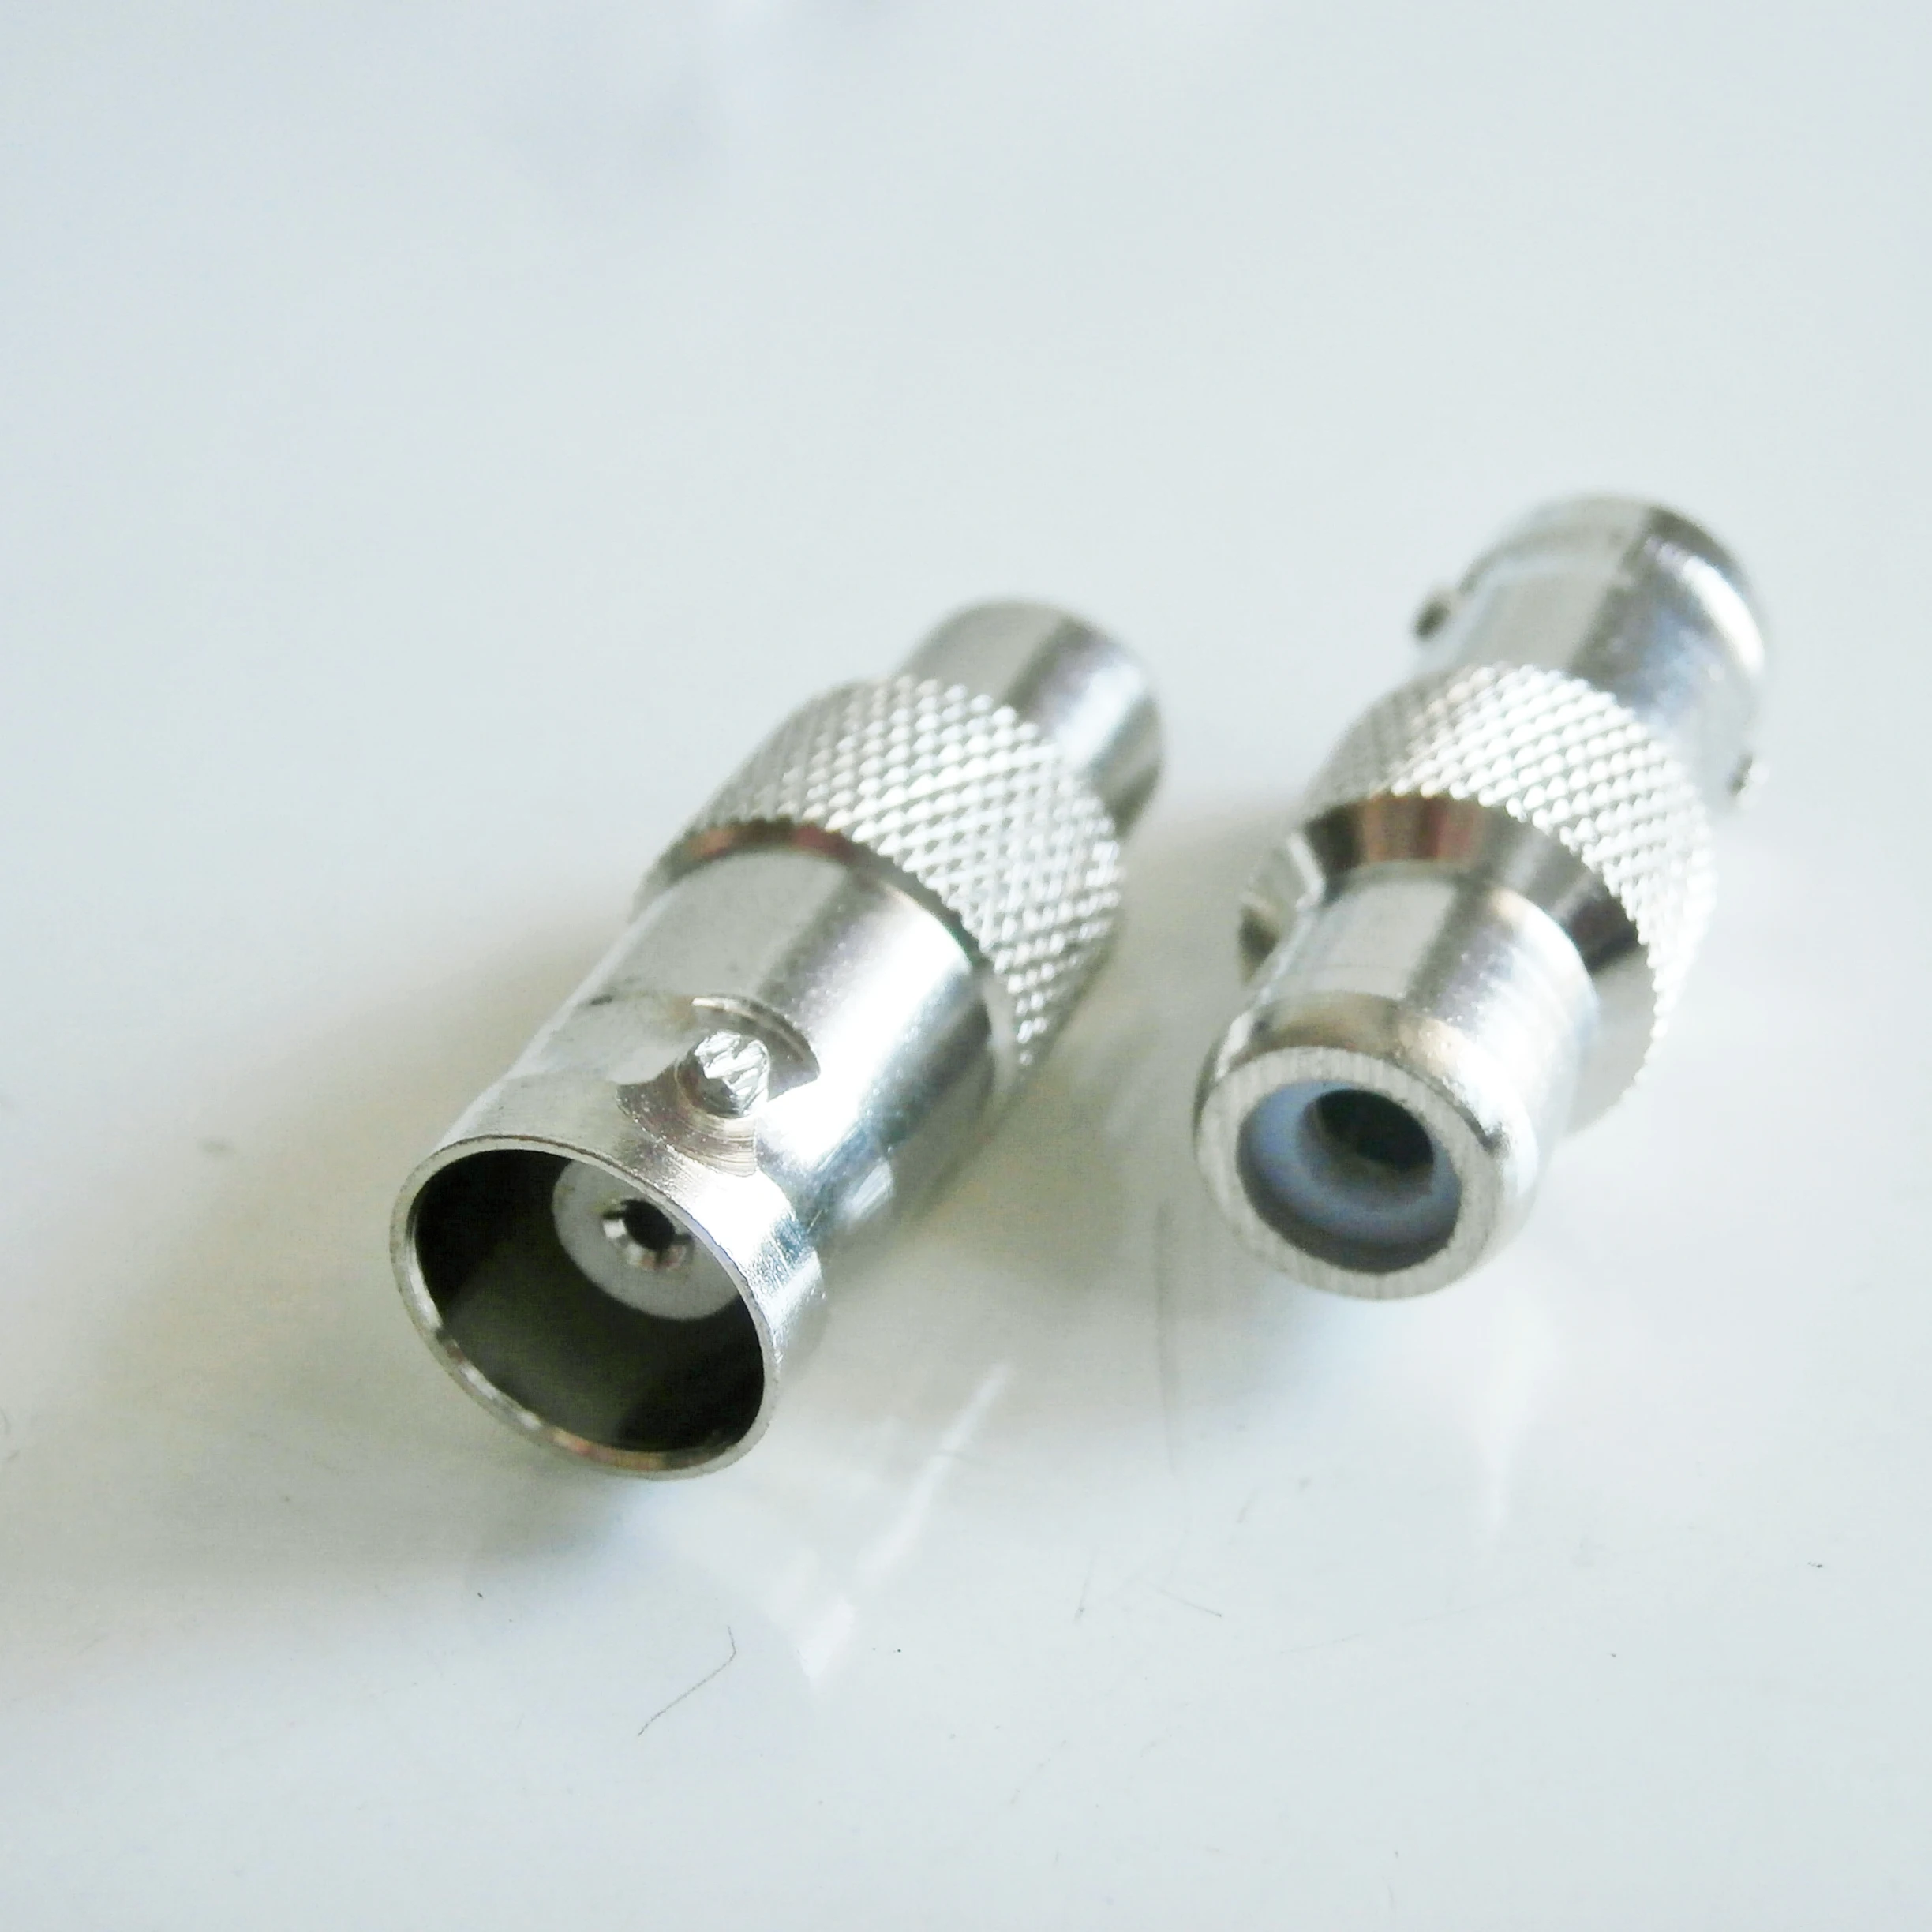 

1X Pcs Q9 BNC Female To RCA Female Plug Nickel Plated Brass Straight Q9 BNC to RCA Coaxial RF Connector Adapters